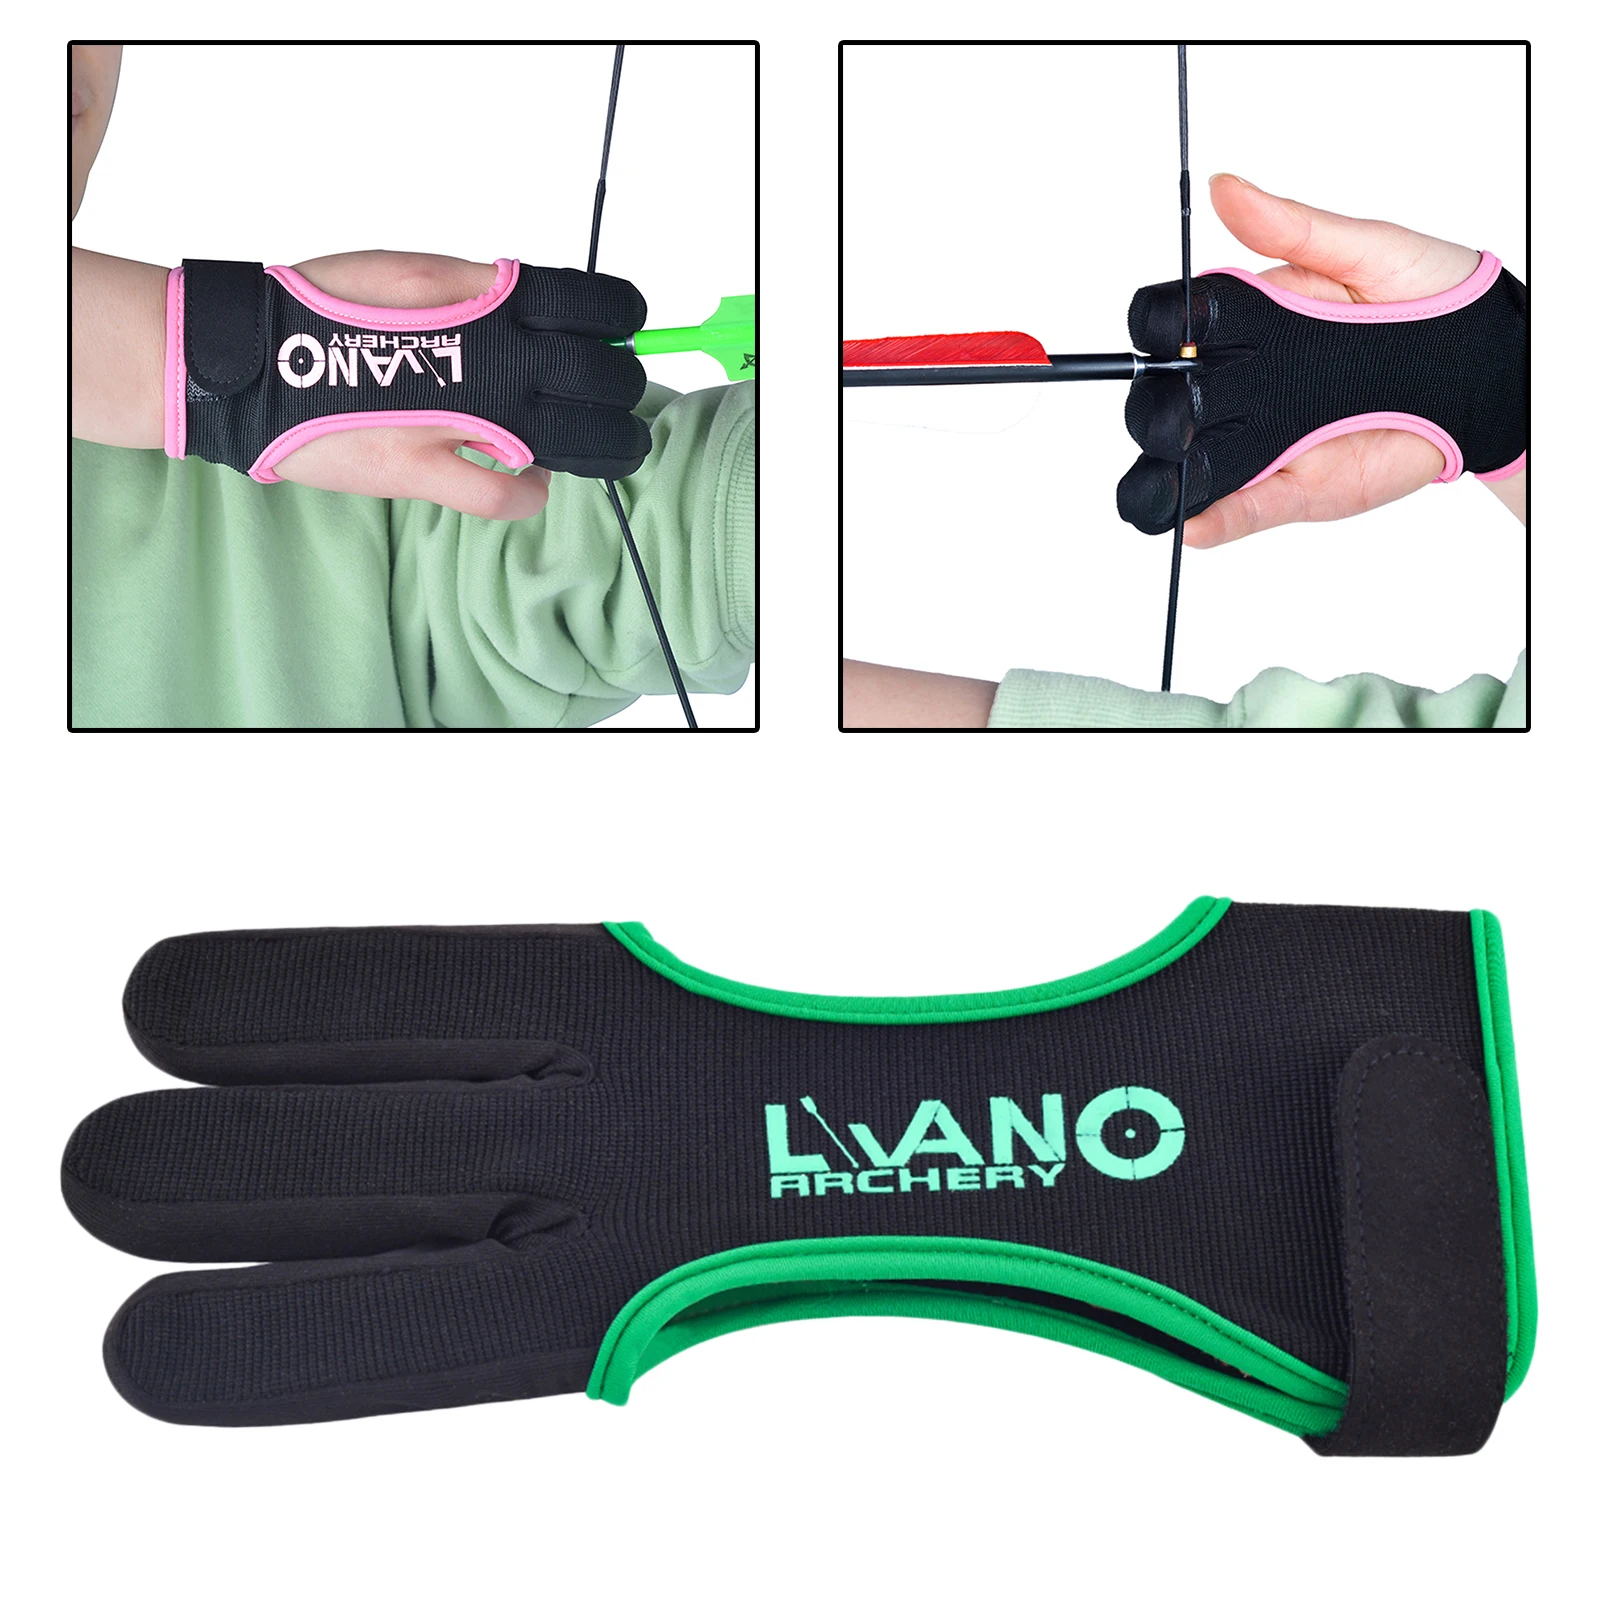 Archery Gloves 3Finger Tab Guard for Recurve & Compound Bow Shooting Protector. 